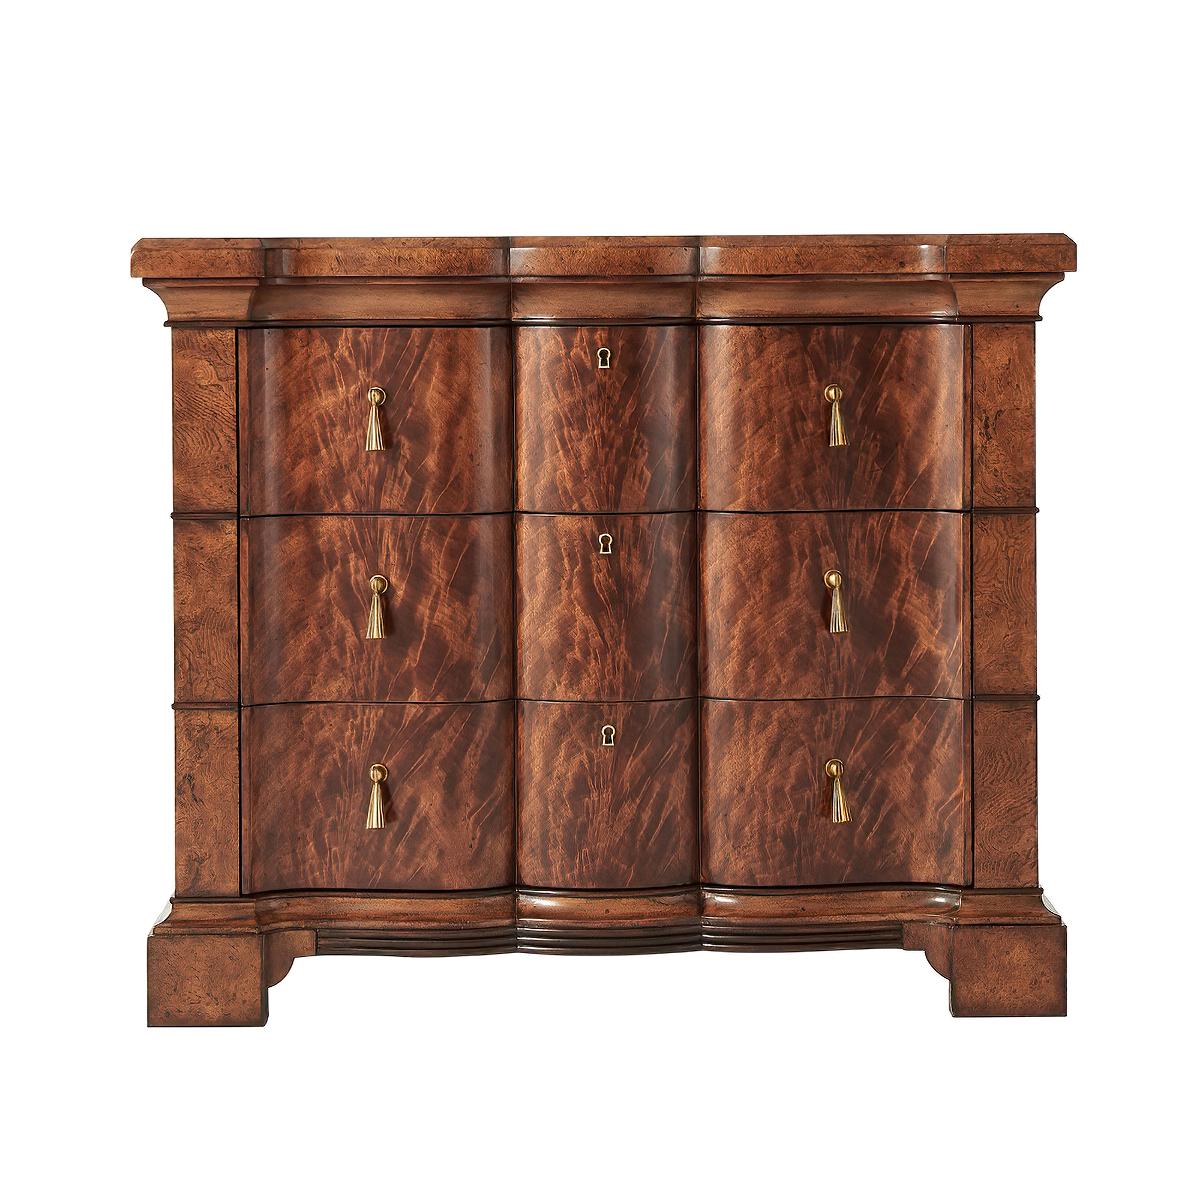 A Chestnut Burl veneered and flame mahogany nightstand, the serpentine flame mahogany veneered top above three flame mahogany veneered serpentine drawers with drop handles and escutcheons, on a molded base with bracket feet.

Dimensions: 36